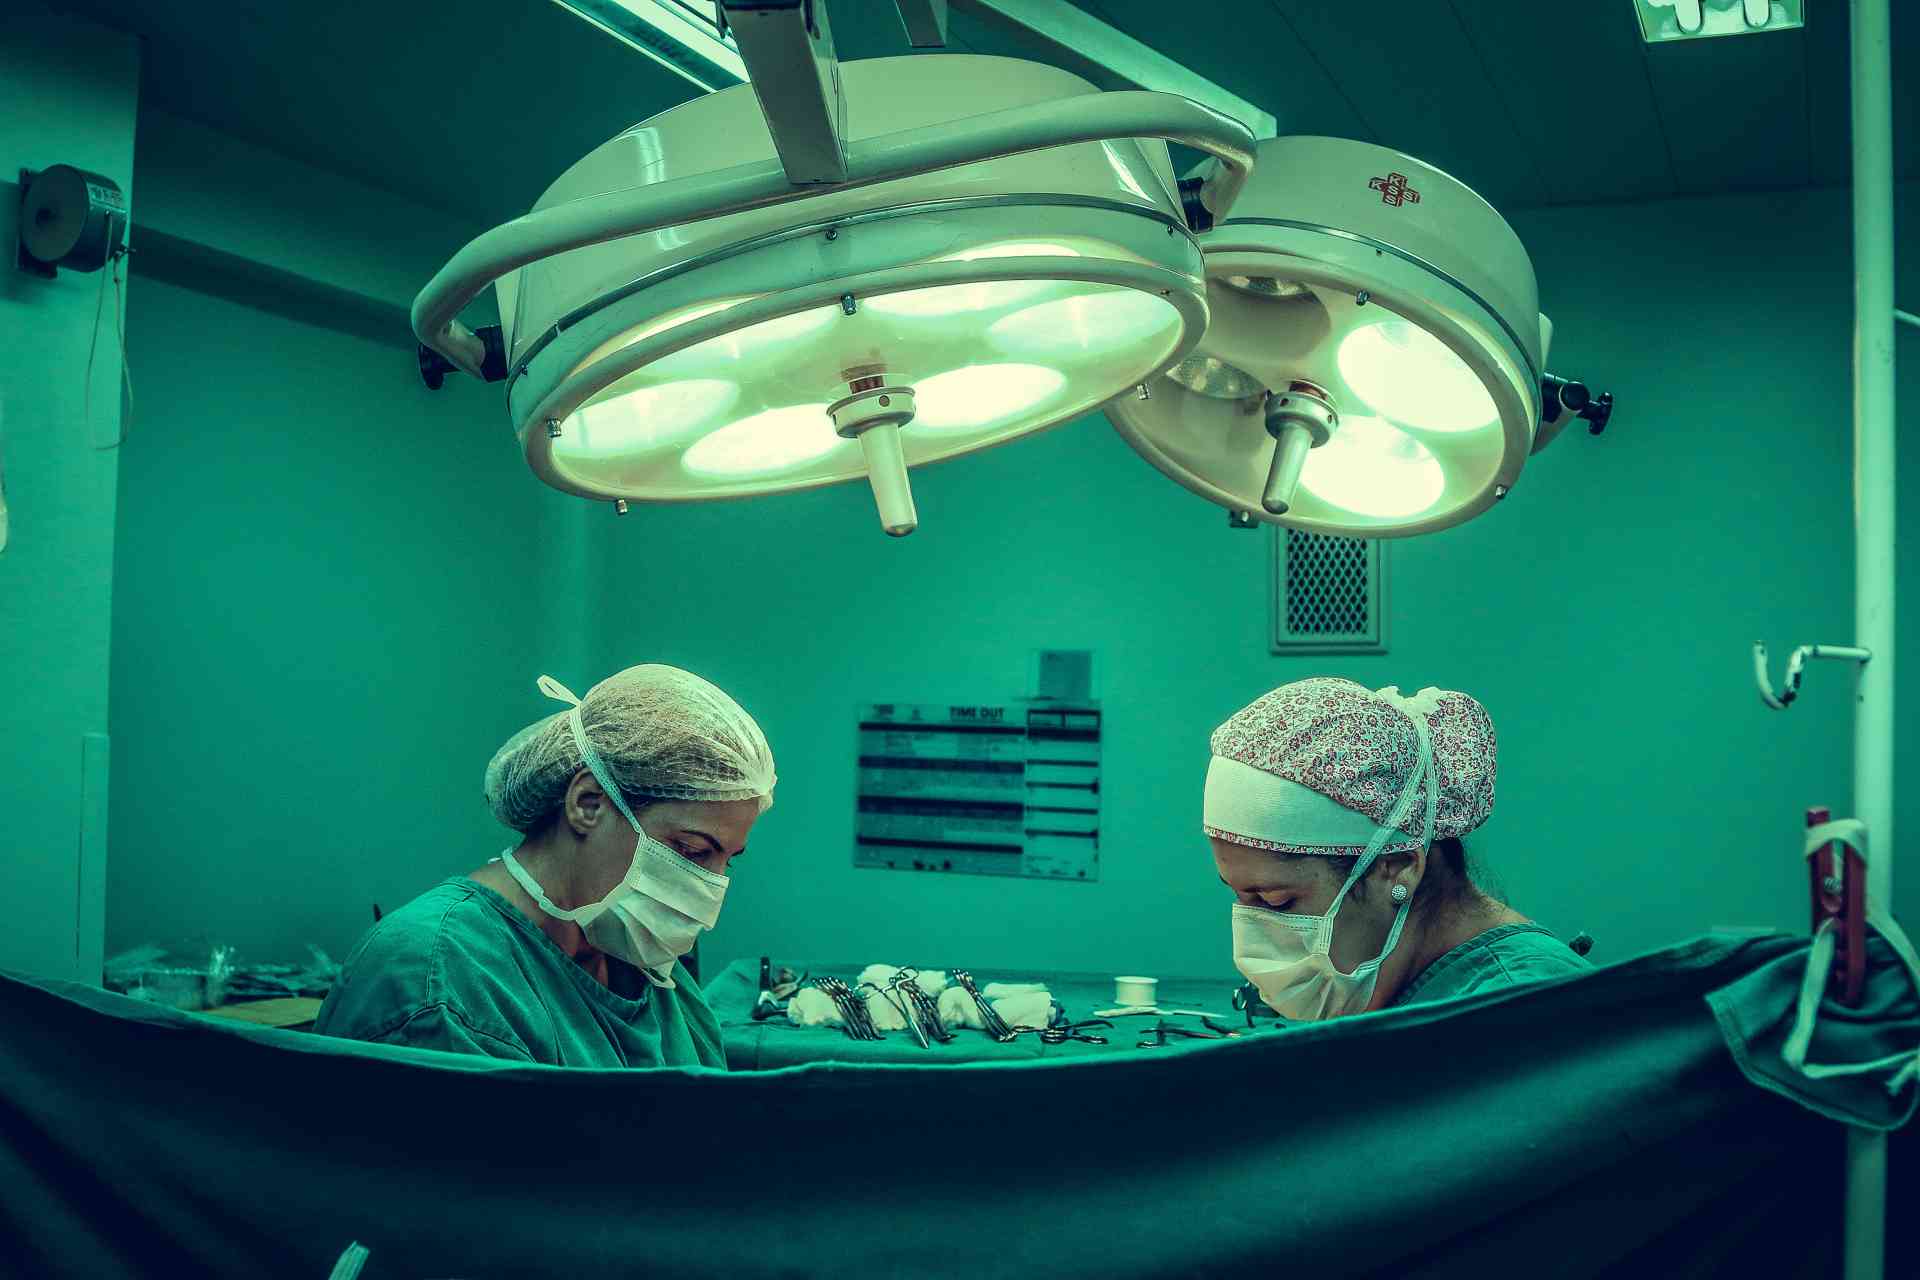 two-person-doing-surgery-inside-room-1250655